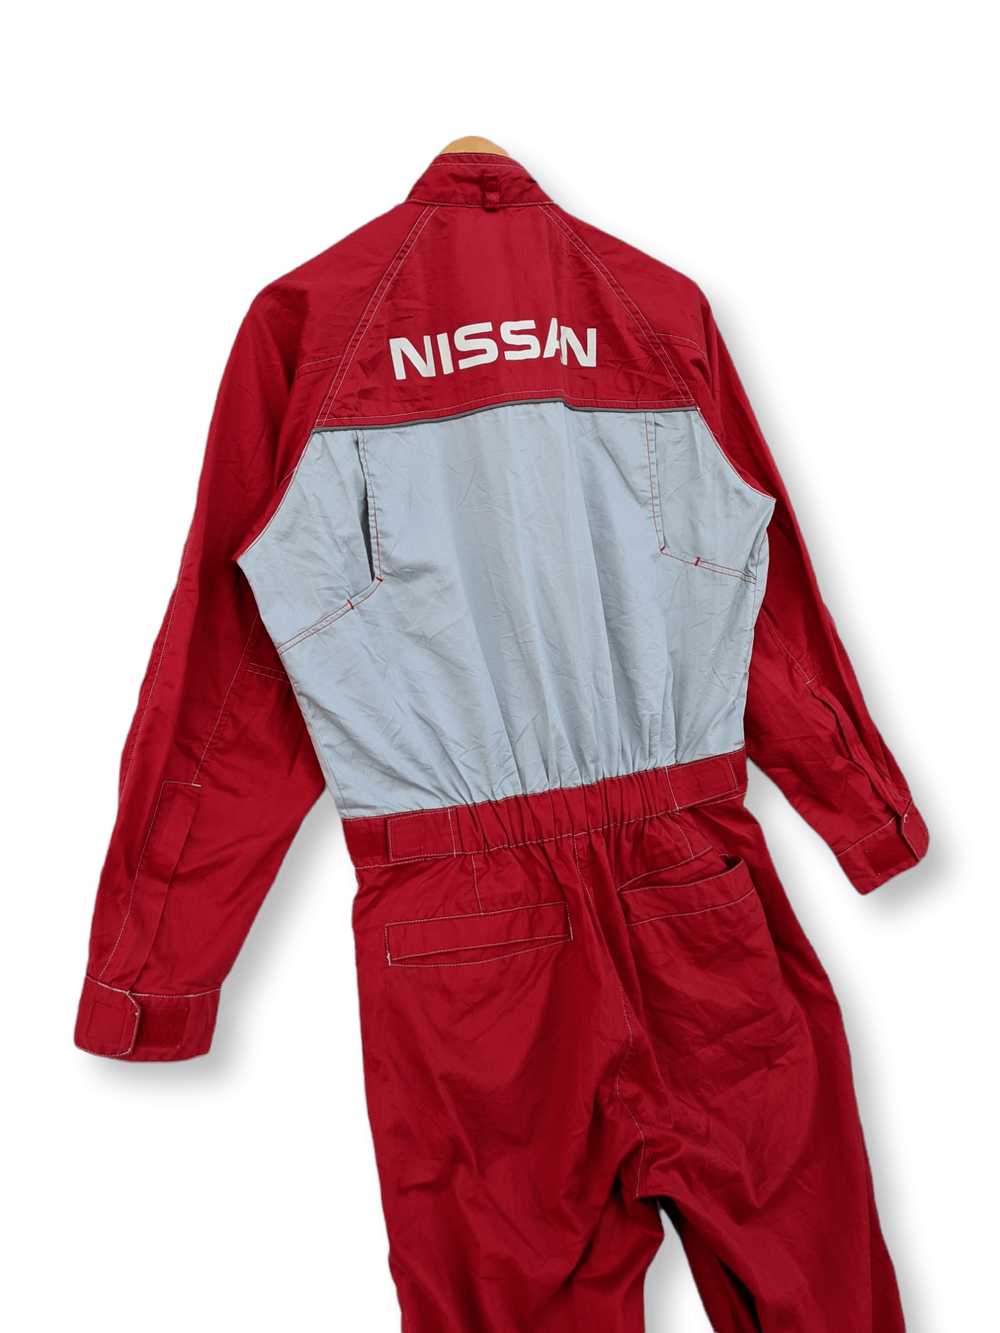 Gear For Sports × Racing Nissan Racing Worker Ove… - image 10